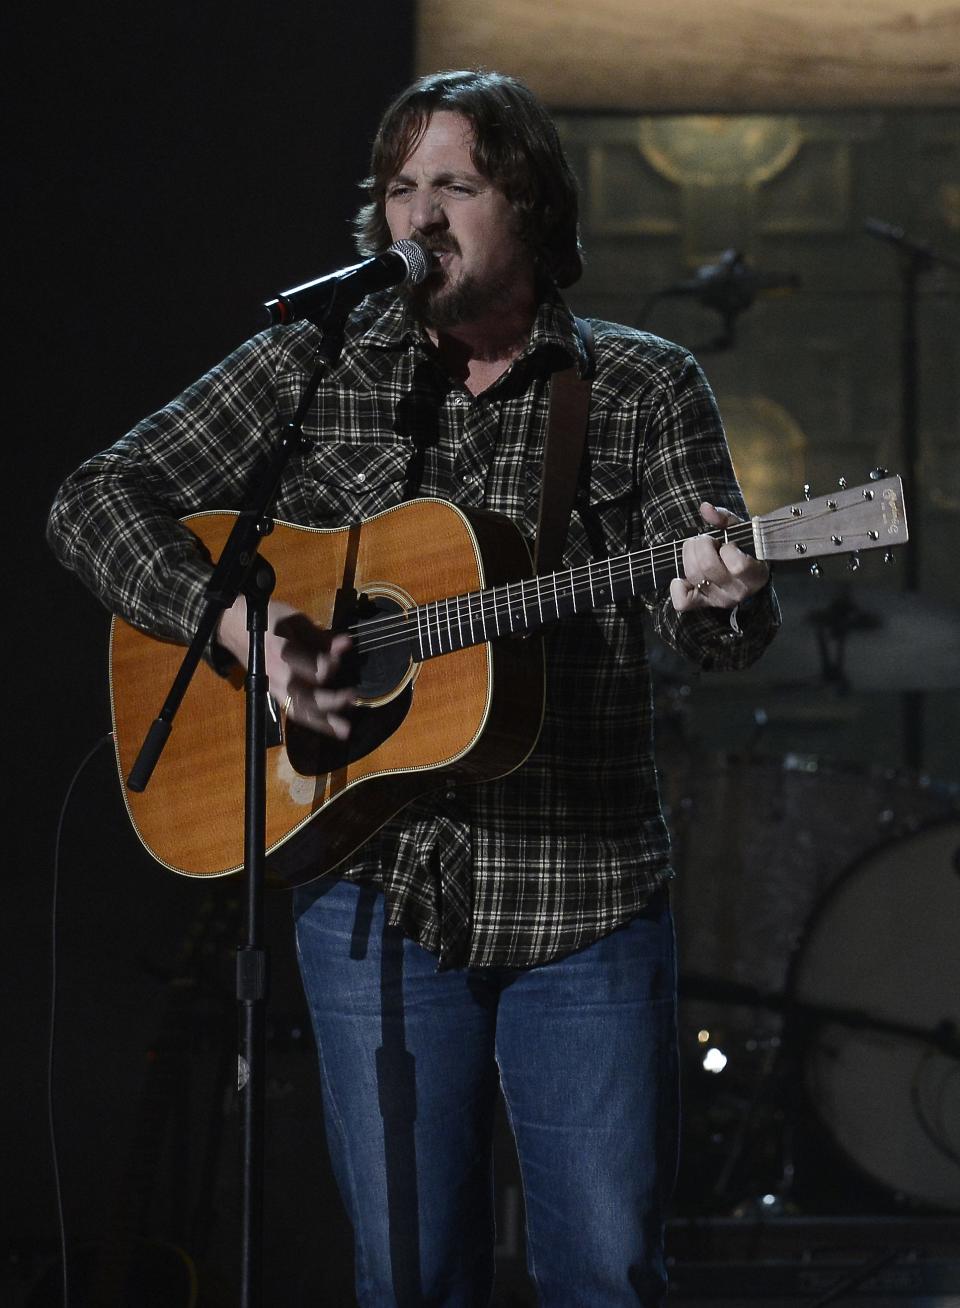 Sturgill Simpson performs during the Americana Music Honors and Awards show Wednesday, Sept. 17, 2014, in Nashville, Tenn. (AP Photo/Mark Zaleski)